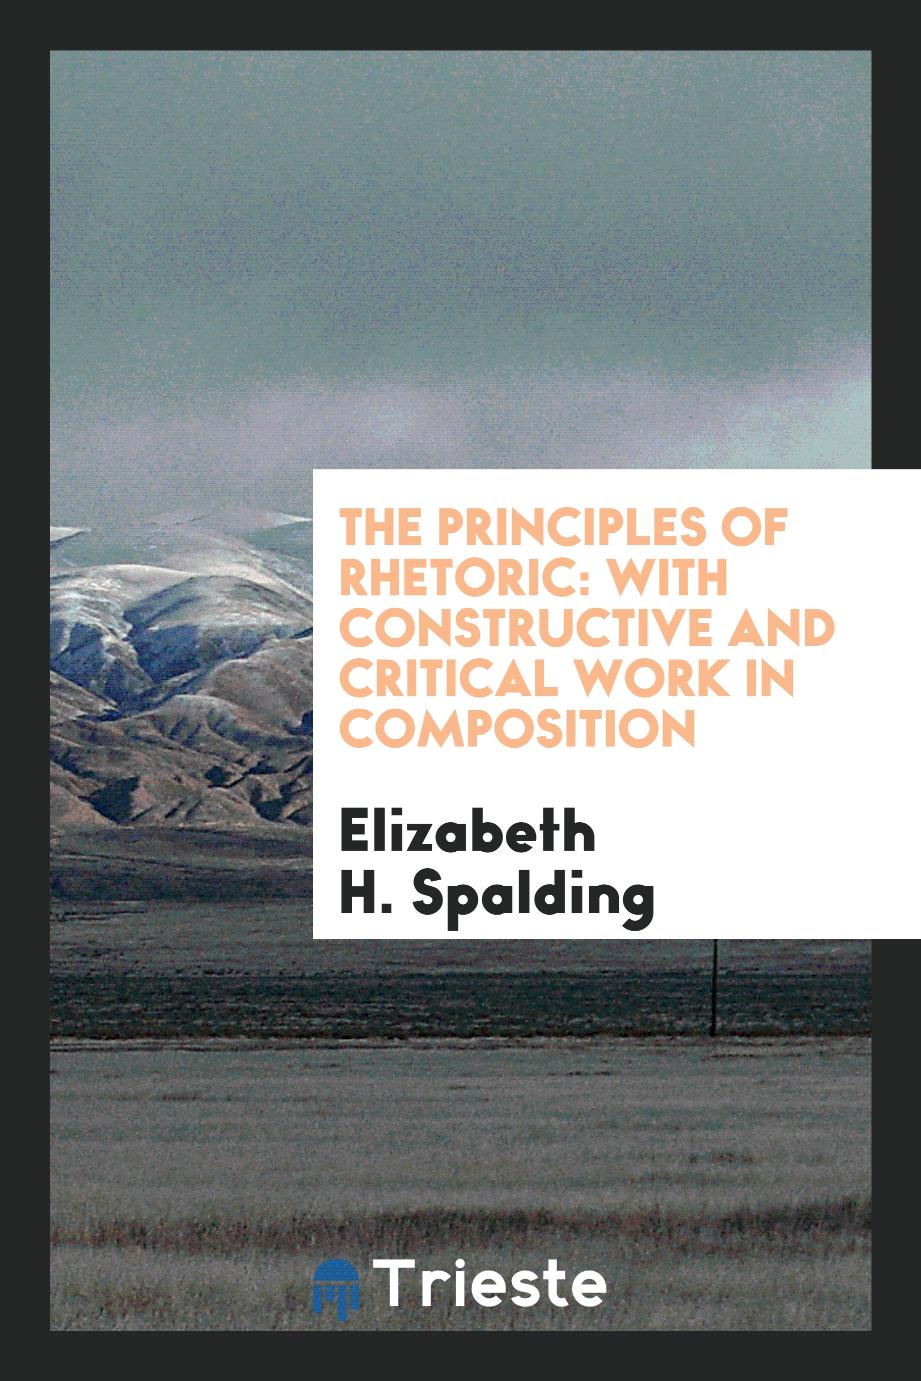 The principles of rhetoric: with constructive and critical work in composition